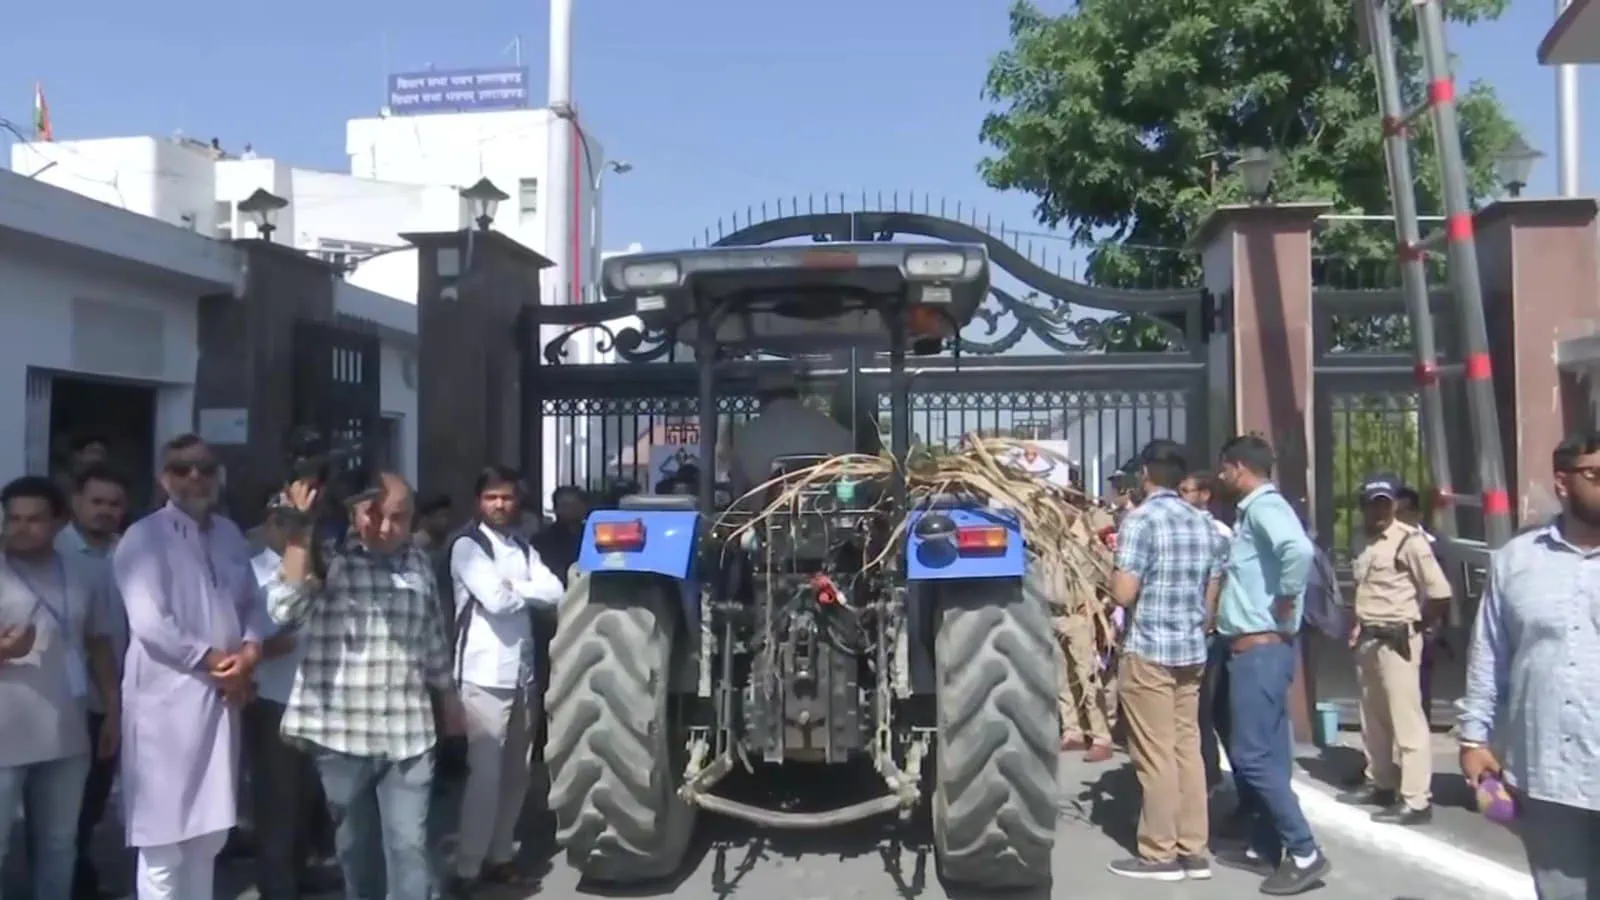 mla reaches uttarakhand assembly with rotten sugarcane produce 4 – The News Mill